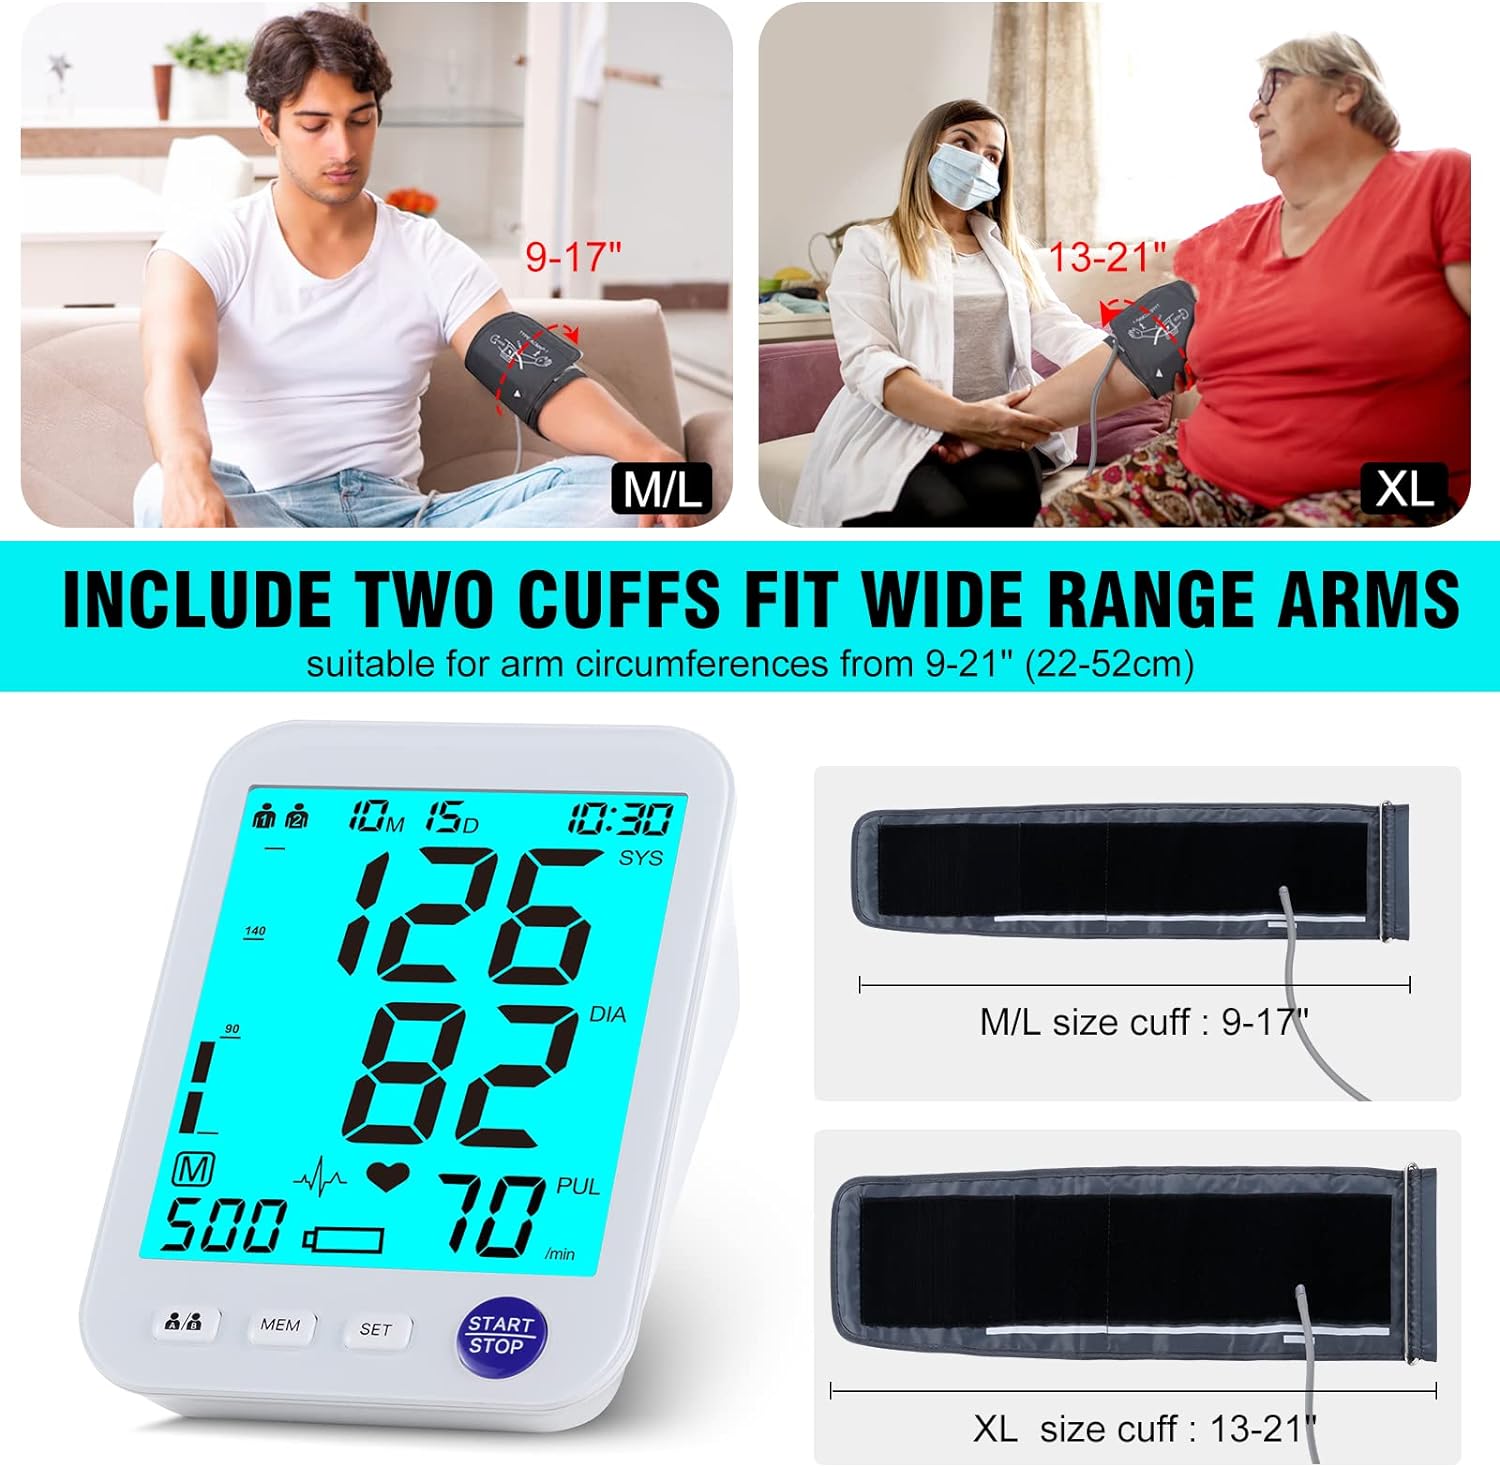 Automatic Blood Pressure Machine XL Cuff for Big Arms 13-21”-Medium/Large Cuff 9-17Extra Large Backlit LCD Heart Rate Detection Two User 1000 Mem (Blue